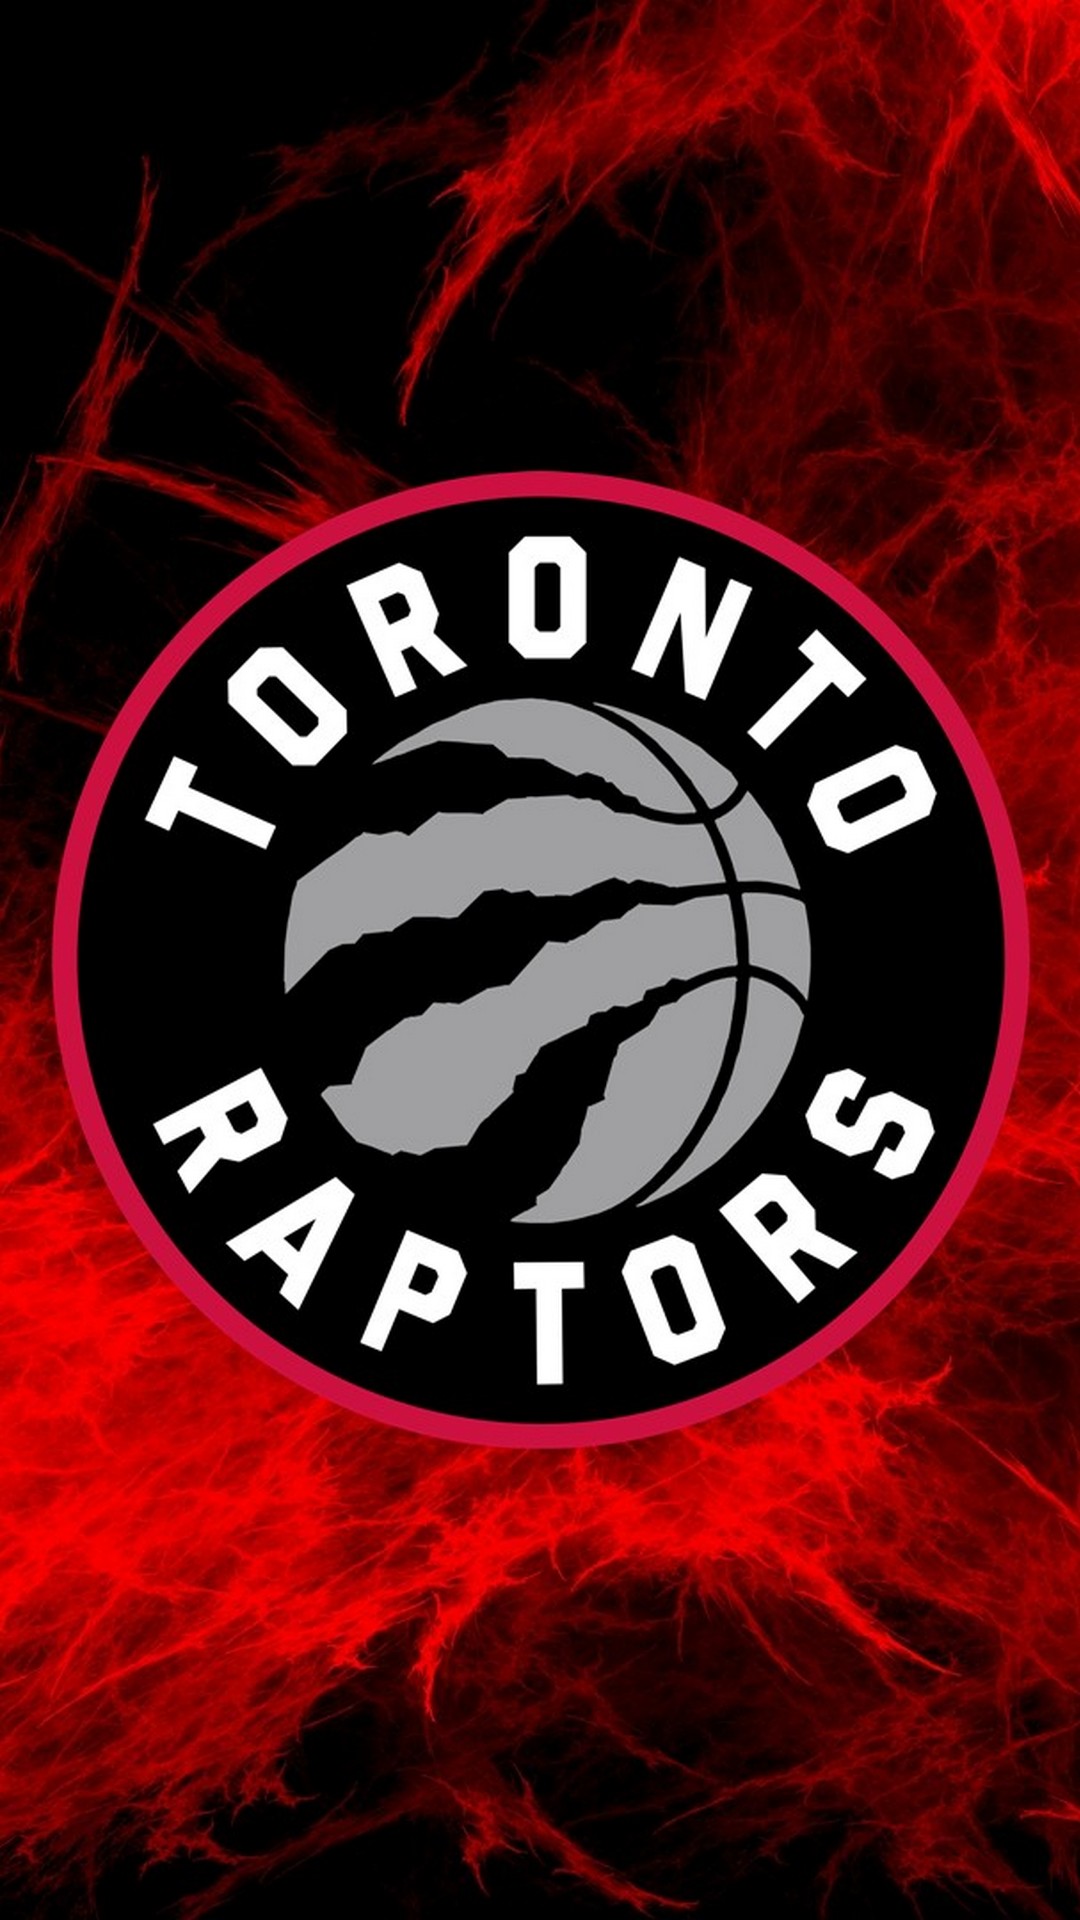 Toronto Raptors Wallpaper For Android with resolution 1080X1920 pixel. You can make this wallpaper for your Android backgrounds, Tablet, Smartphones Screensavers and Mobile Phone Lock Screen